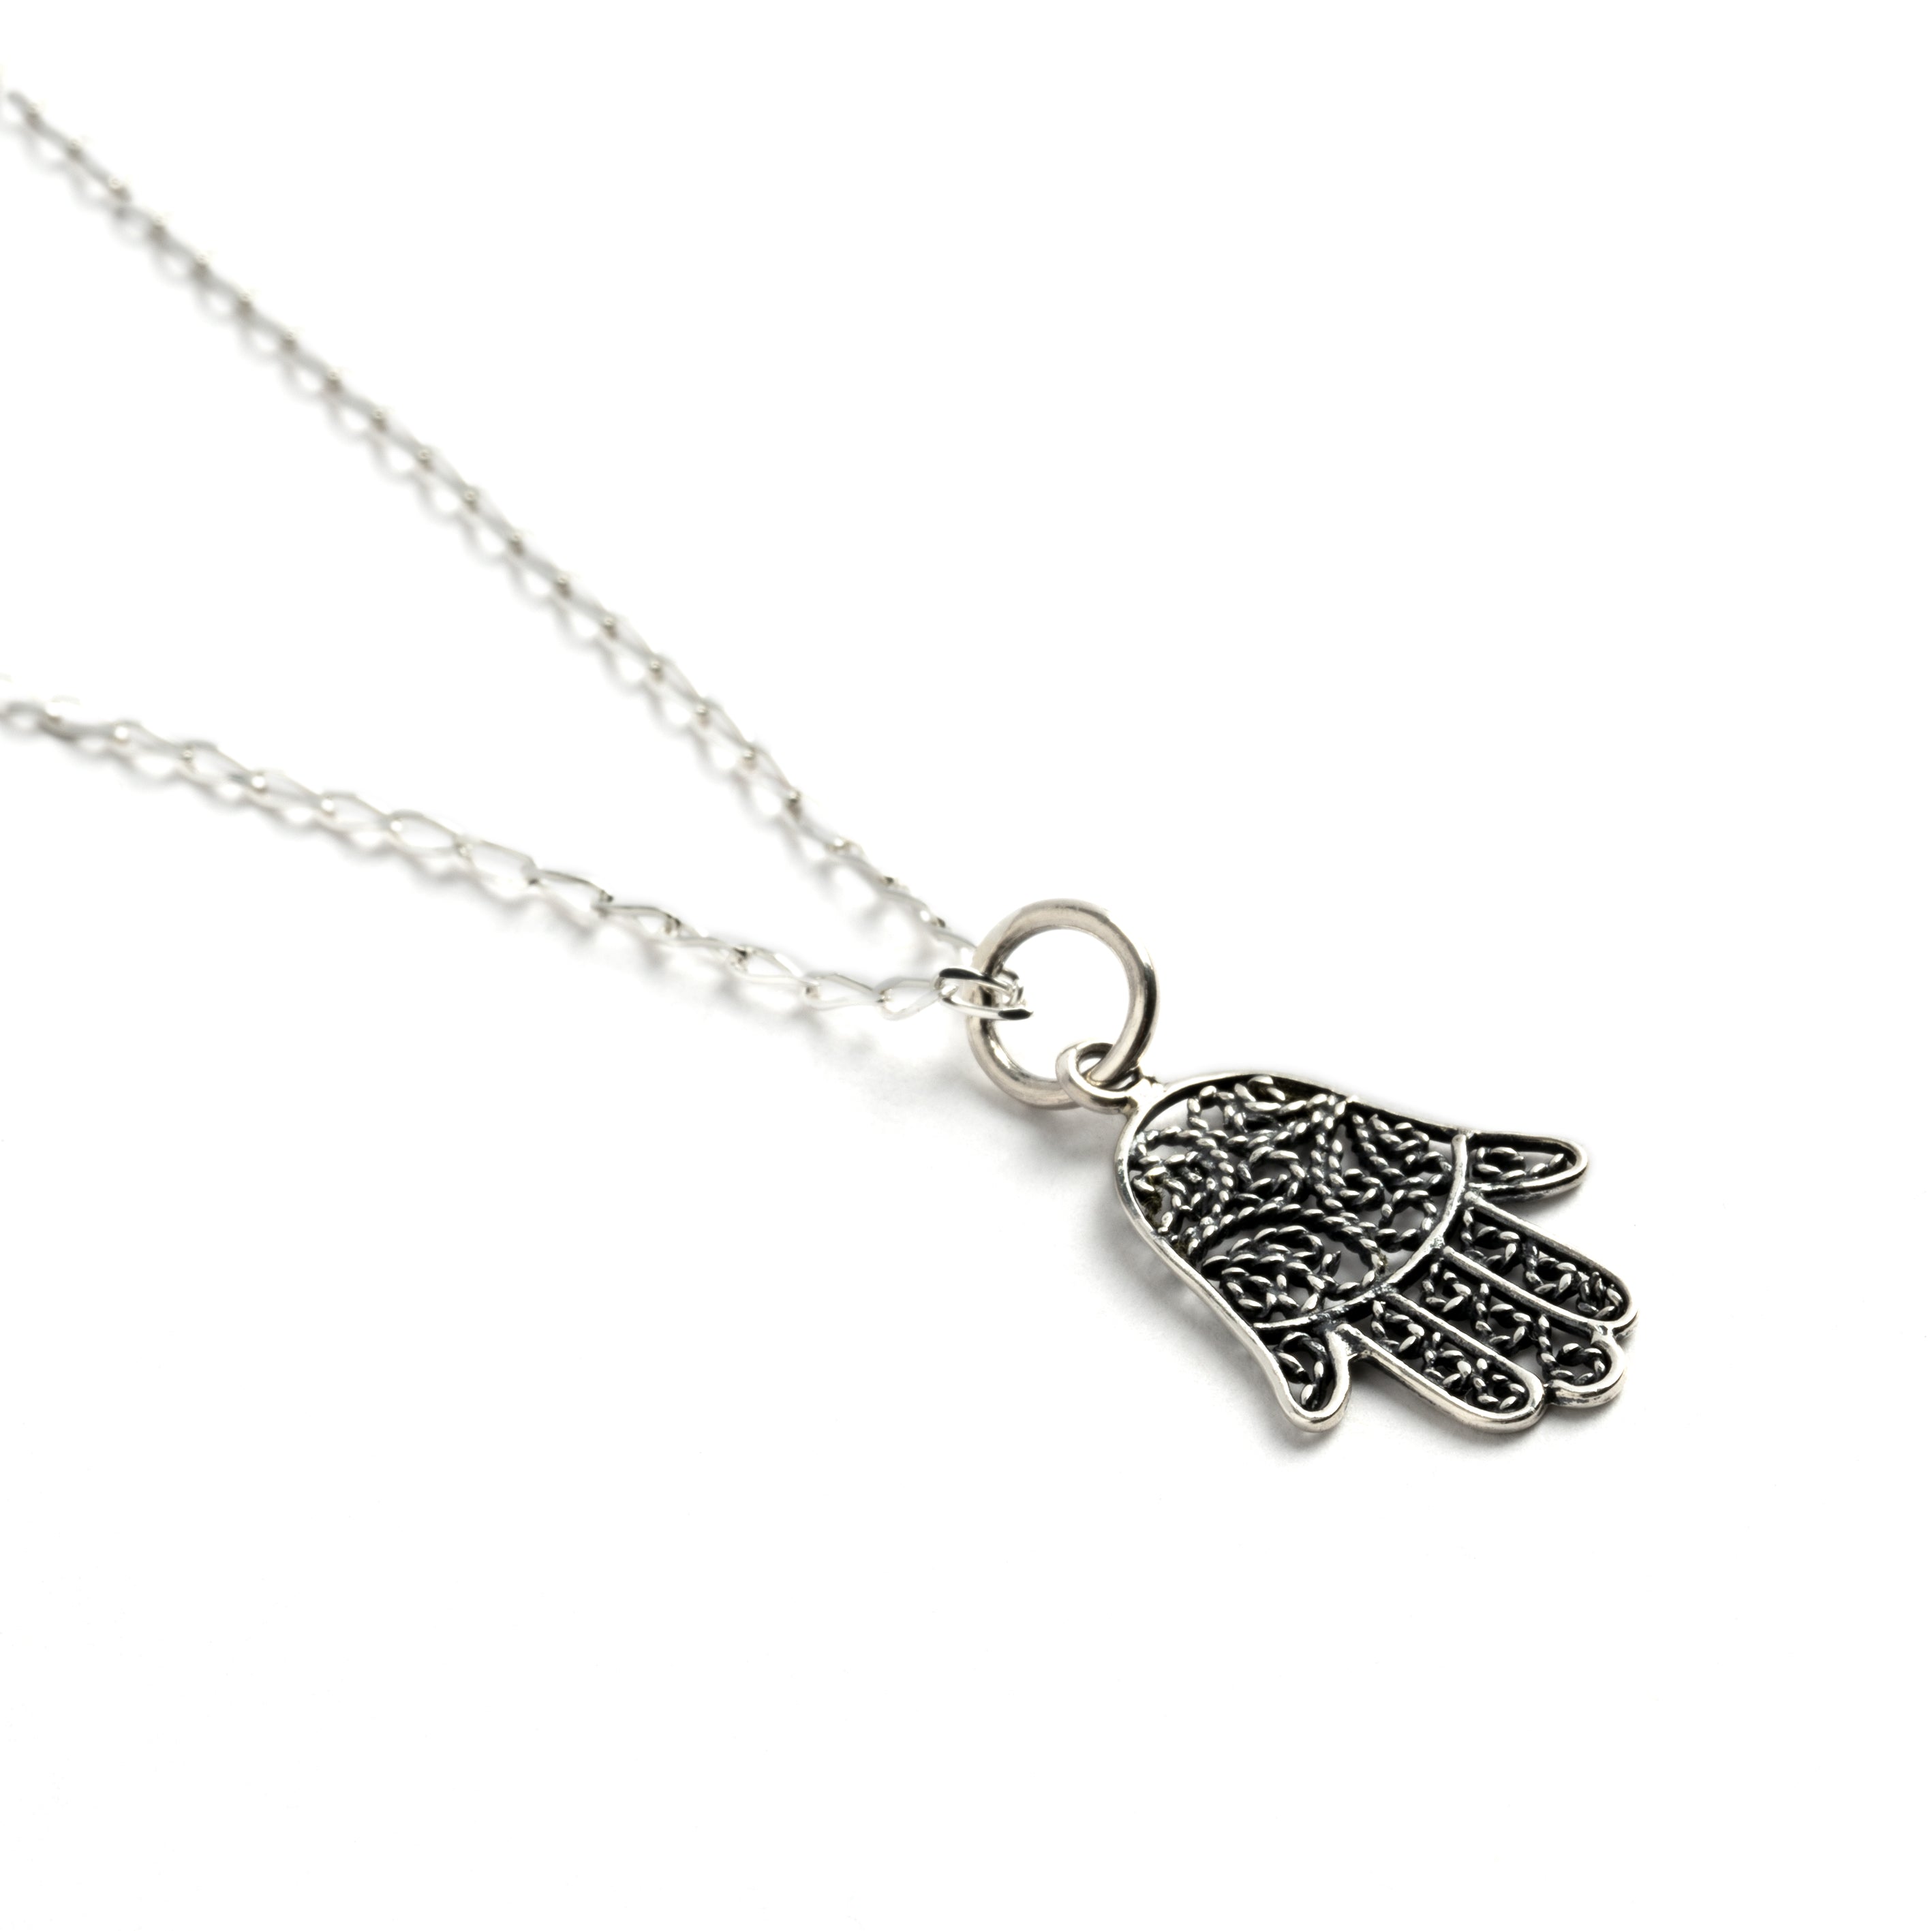 Tiny Silver Hamsa Charm necklace left side view